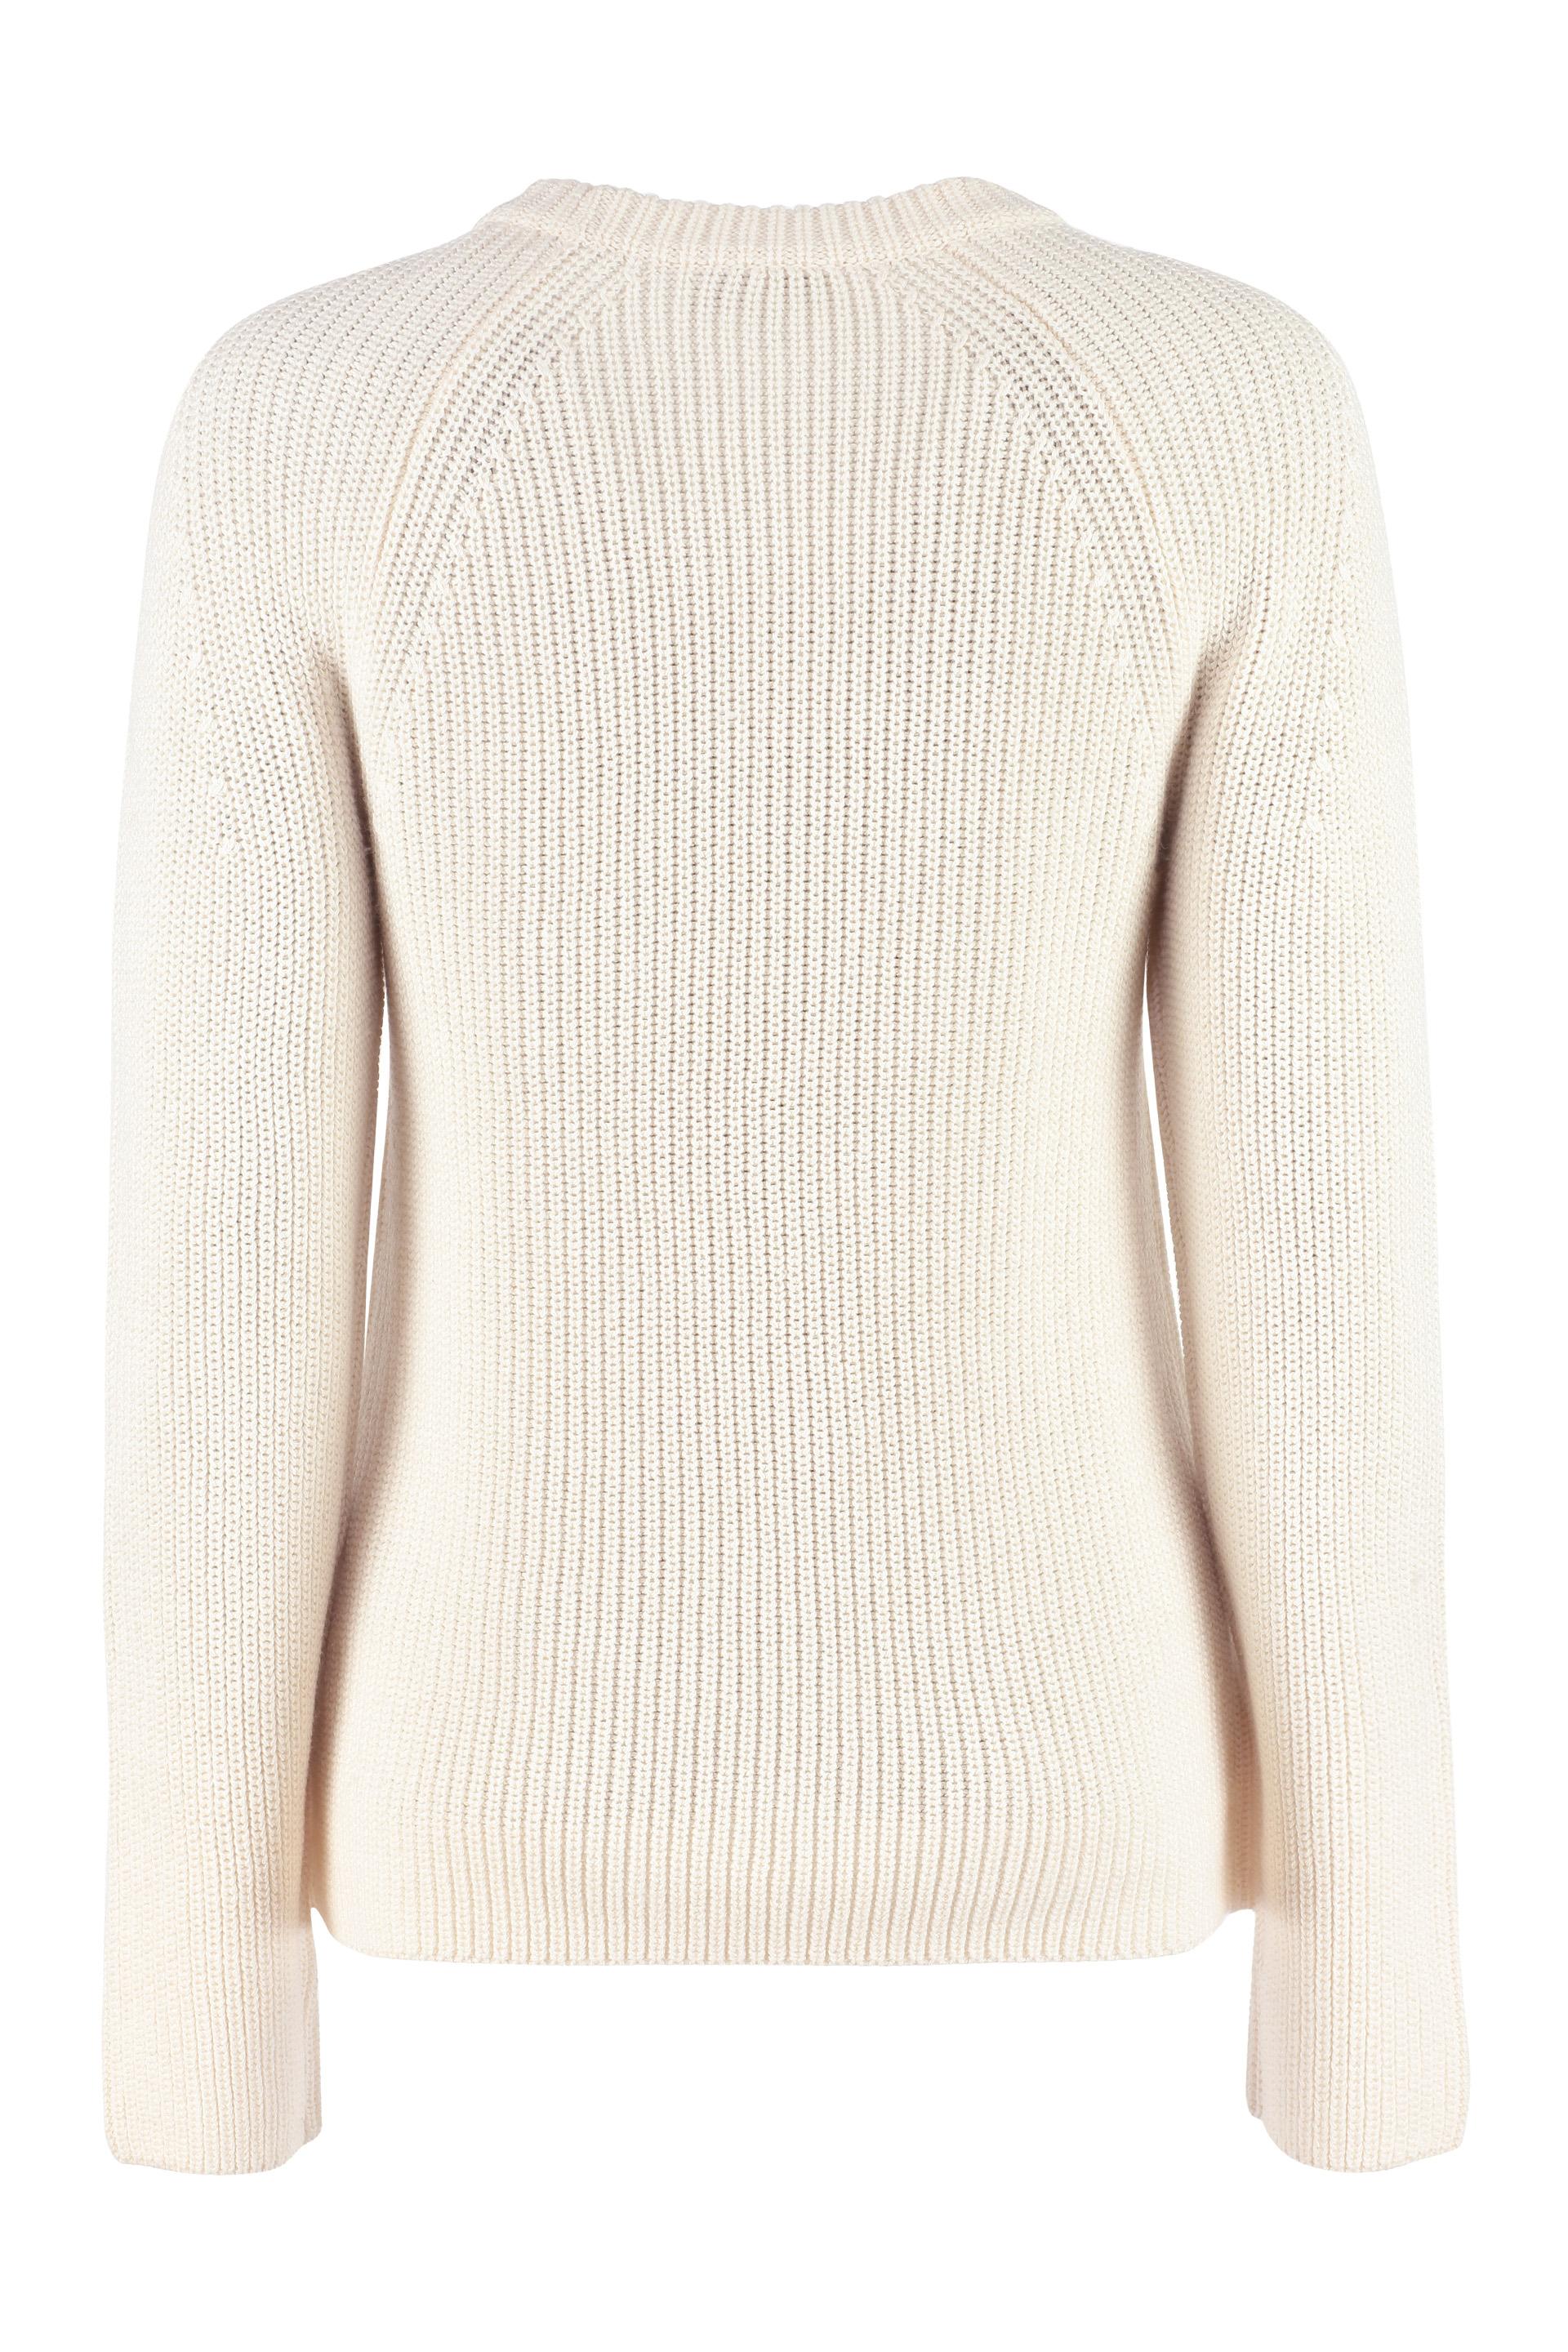 Vince Cotton Ribbed Crew-neck Sweater in Ivory (White) - Lyst